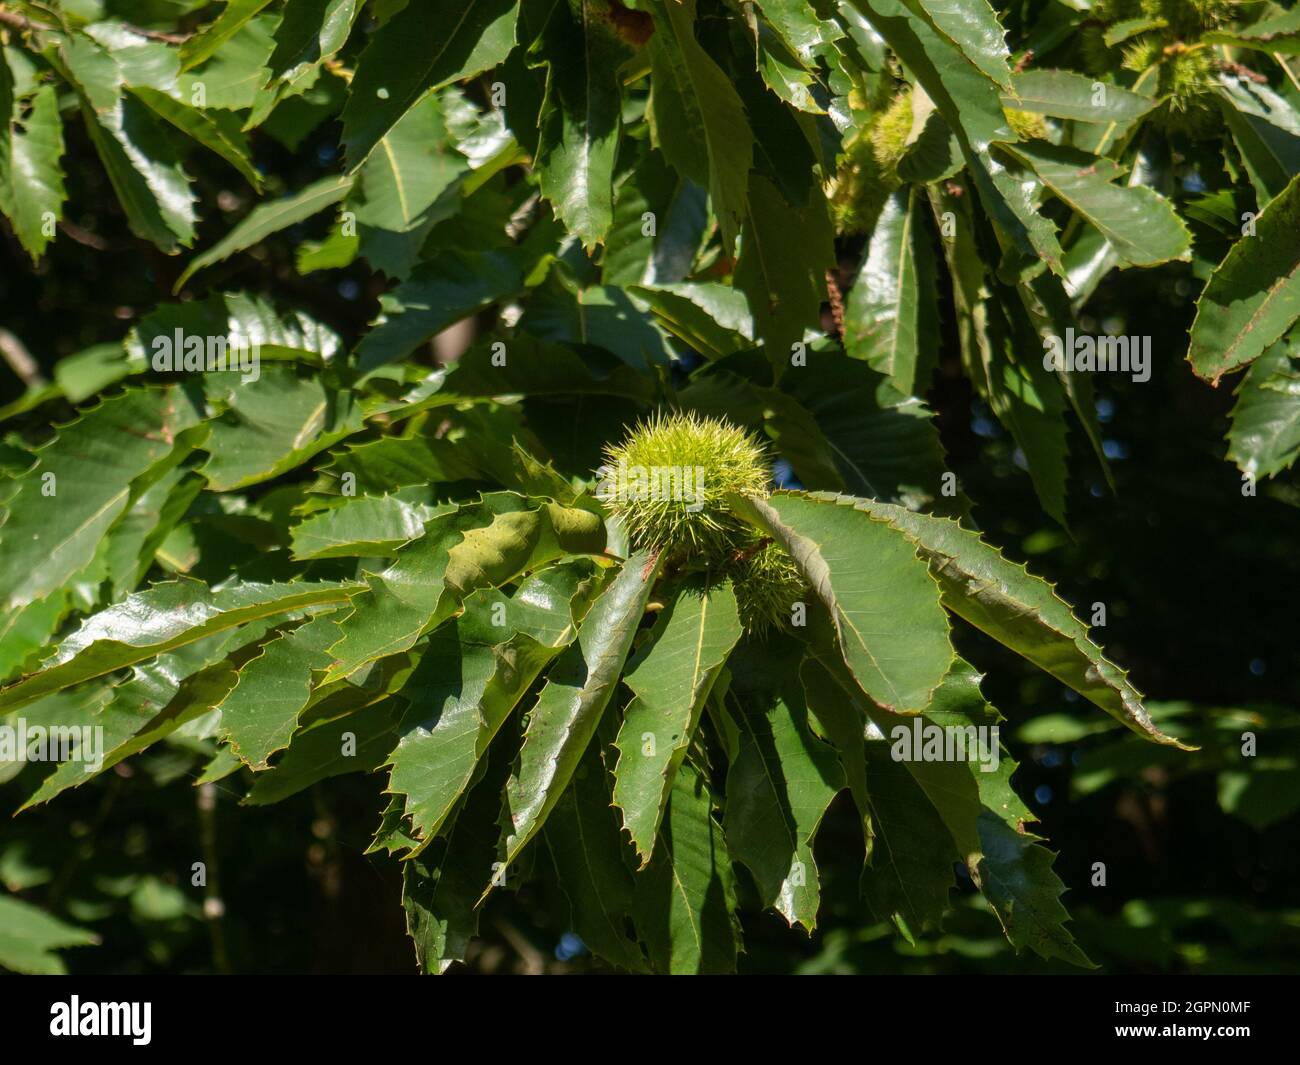 A close up of the spiky green fruit casing of the sweet chestnut (Castanea sativa) against a background of the shiny green leaves Stock Photo